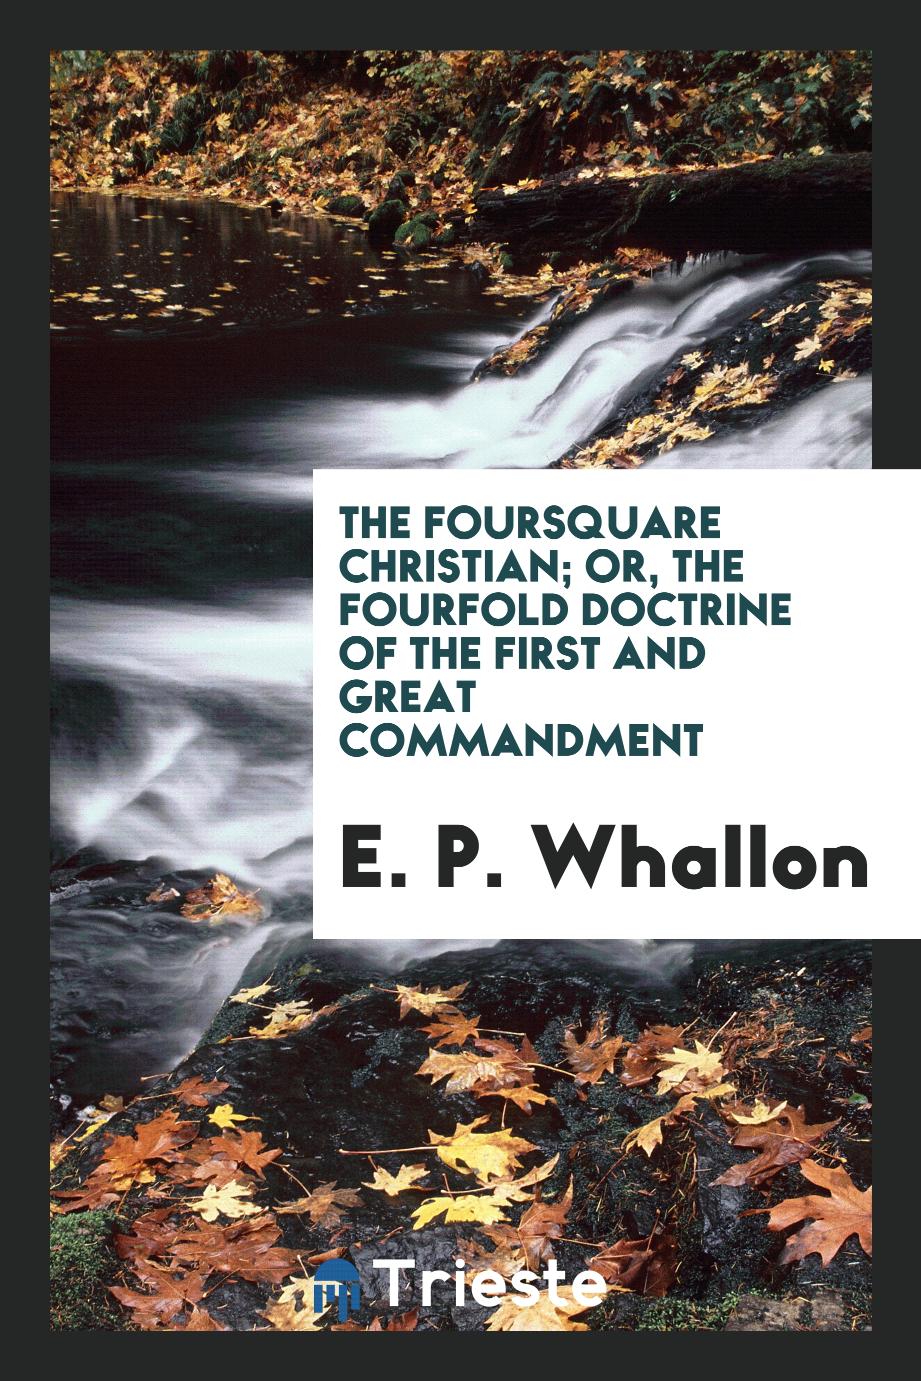 The foursquare Christian; or, The fourfold doctrine of the first and great commandment